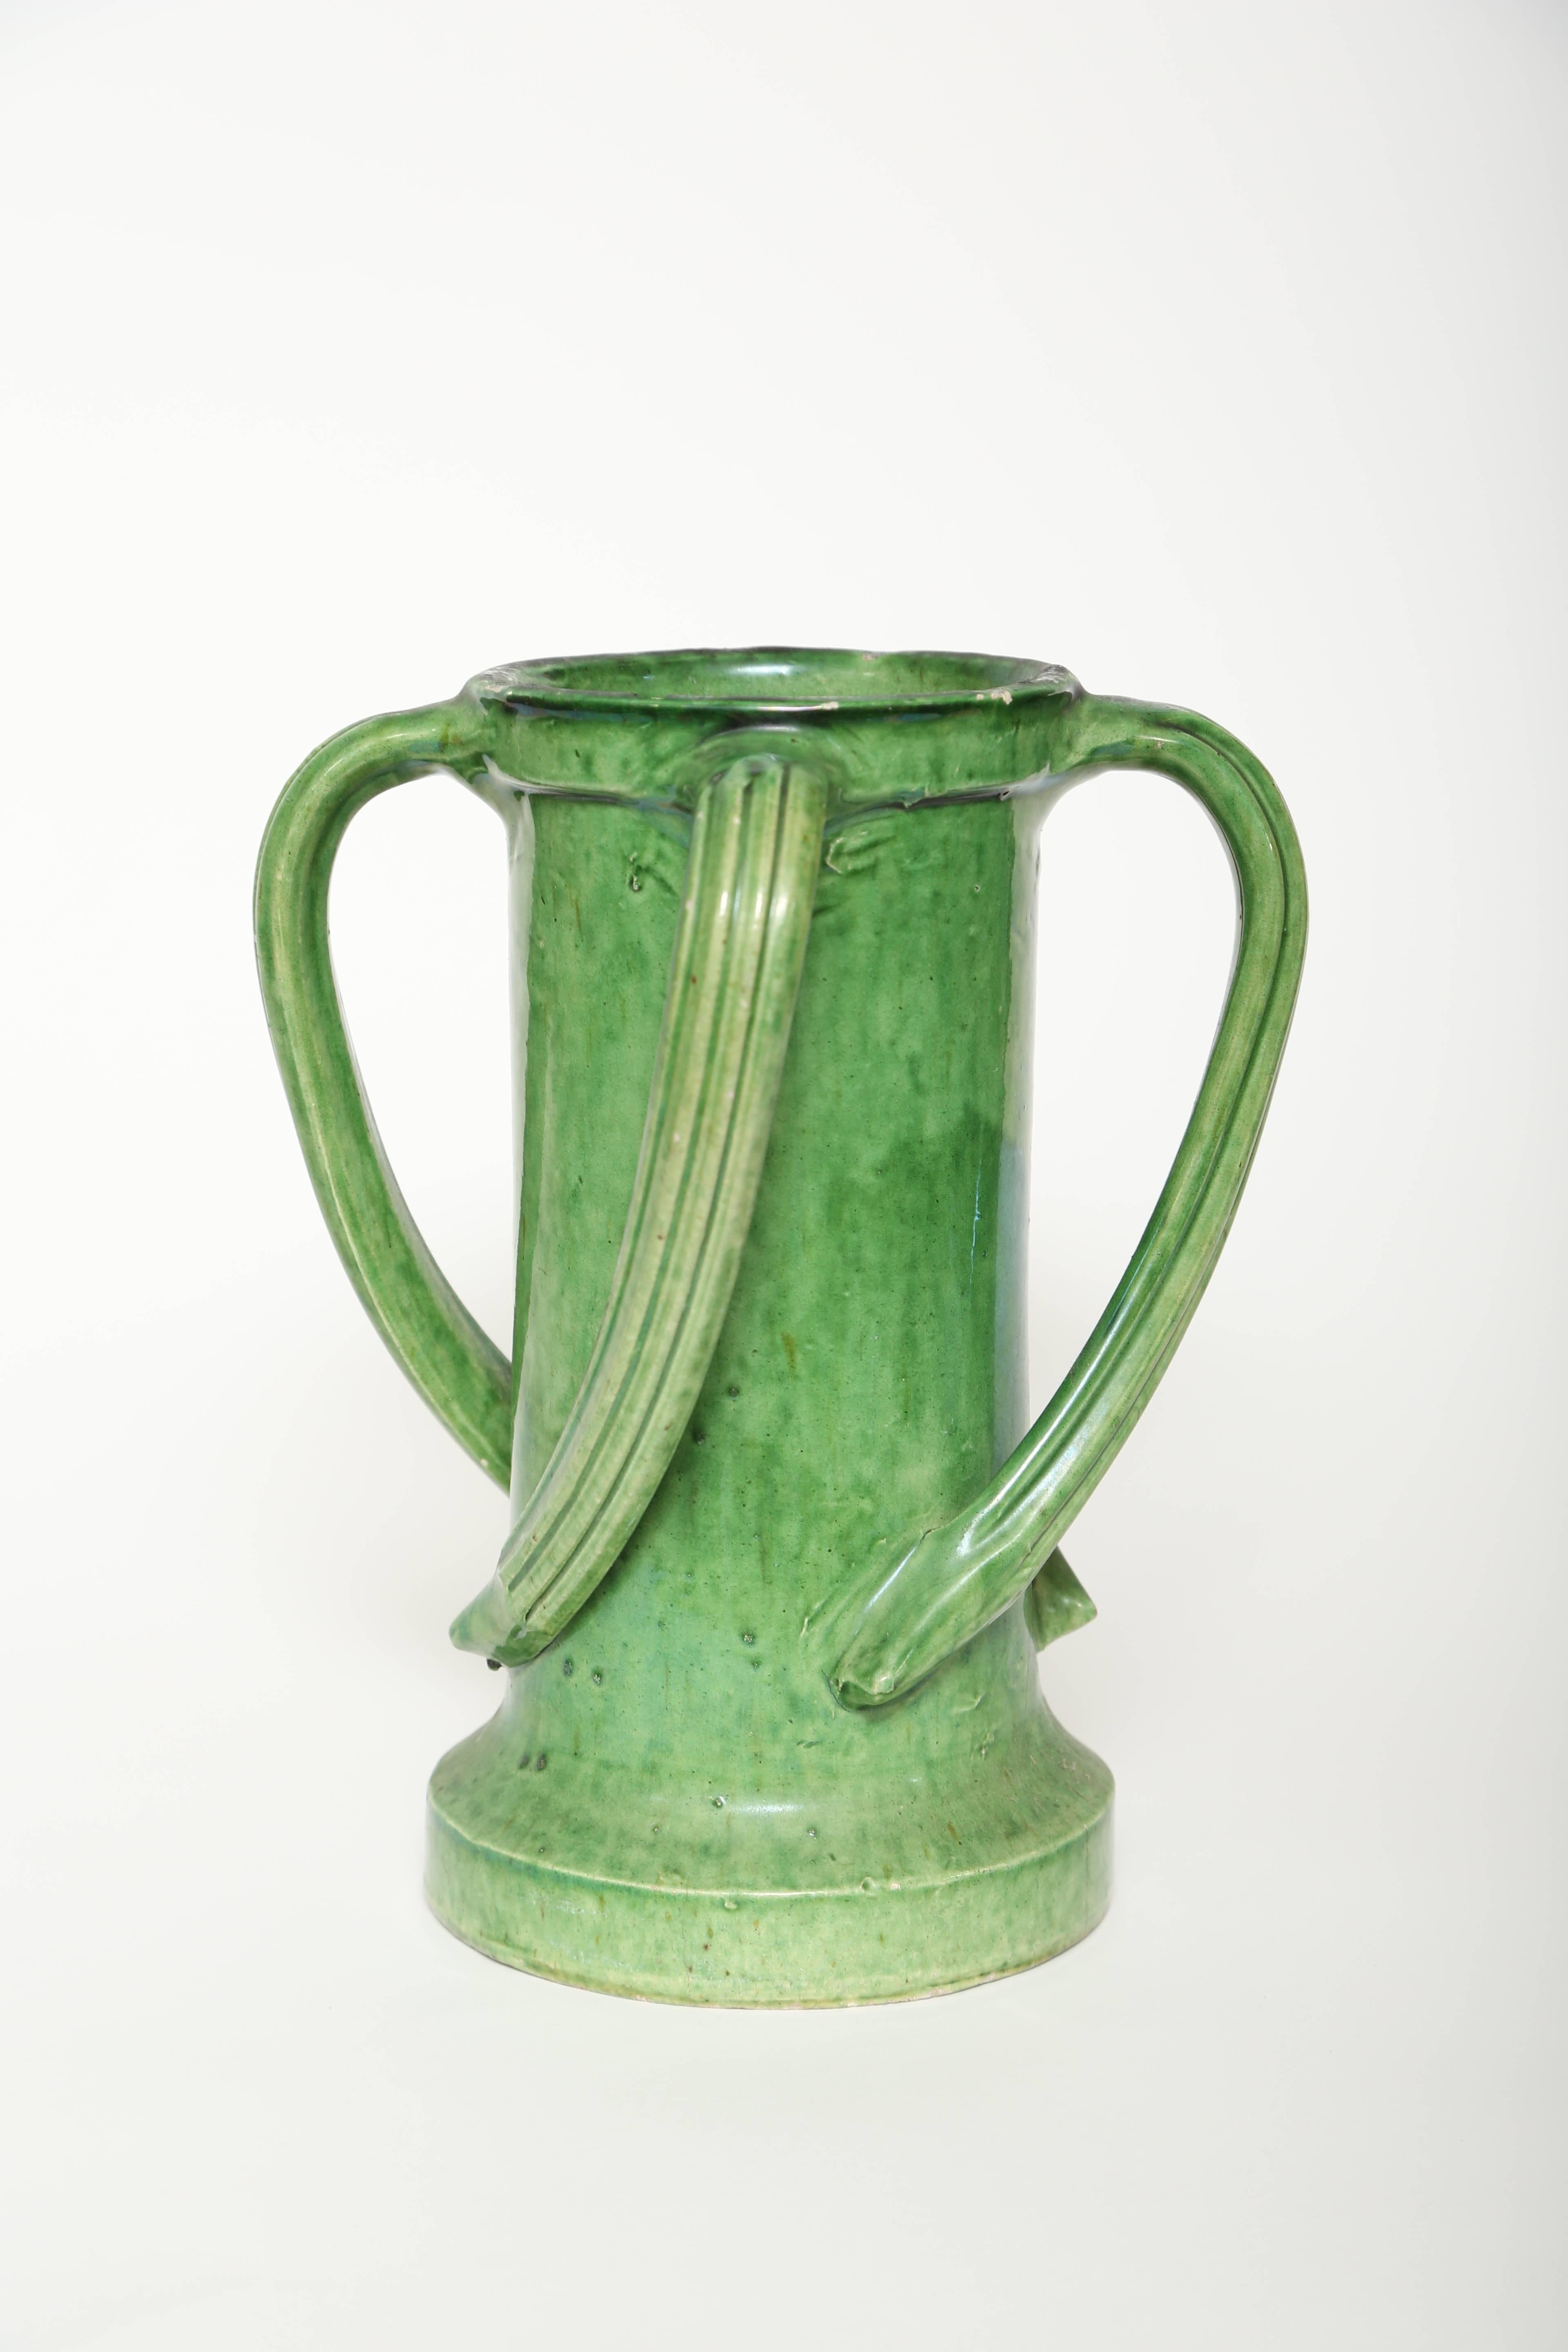 Very unusual antique four handled French green glazed ceramic vase. The handles are applied at the top and gently swirl counter clockwise to the base.
There are several areas where the glaze has raised, however, typical of pottery with this age.
